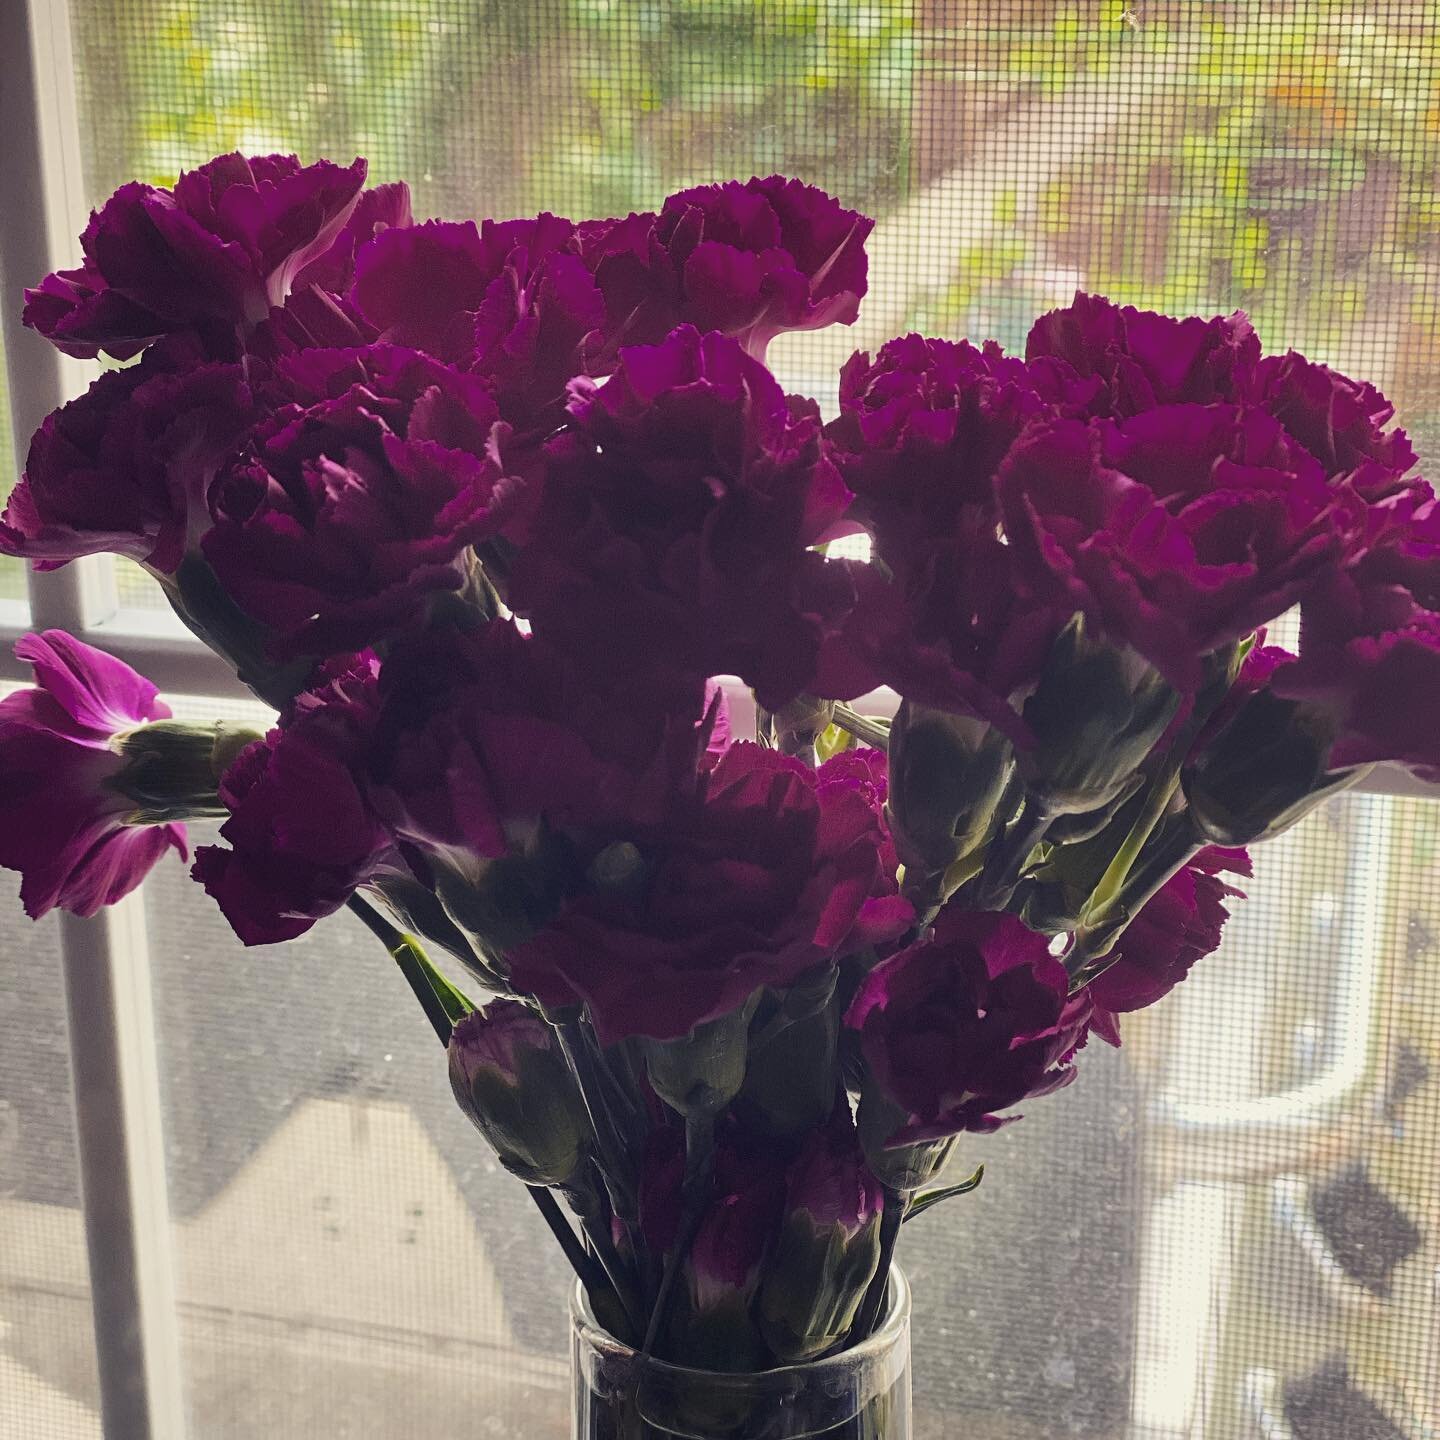 Carnations I picked up during a bi-monthly supply run.